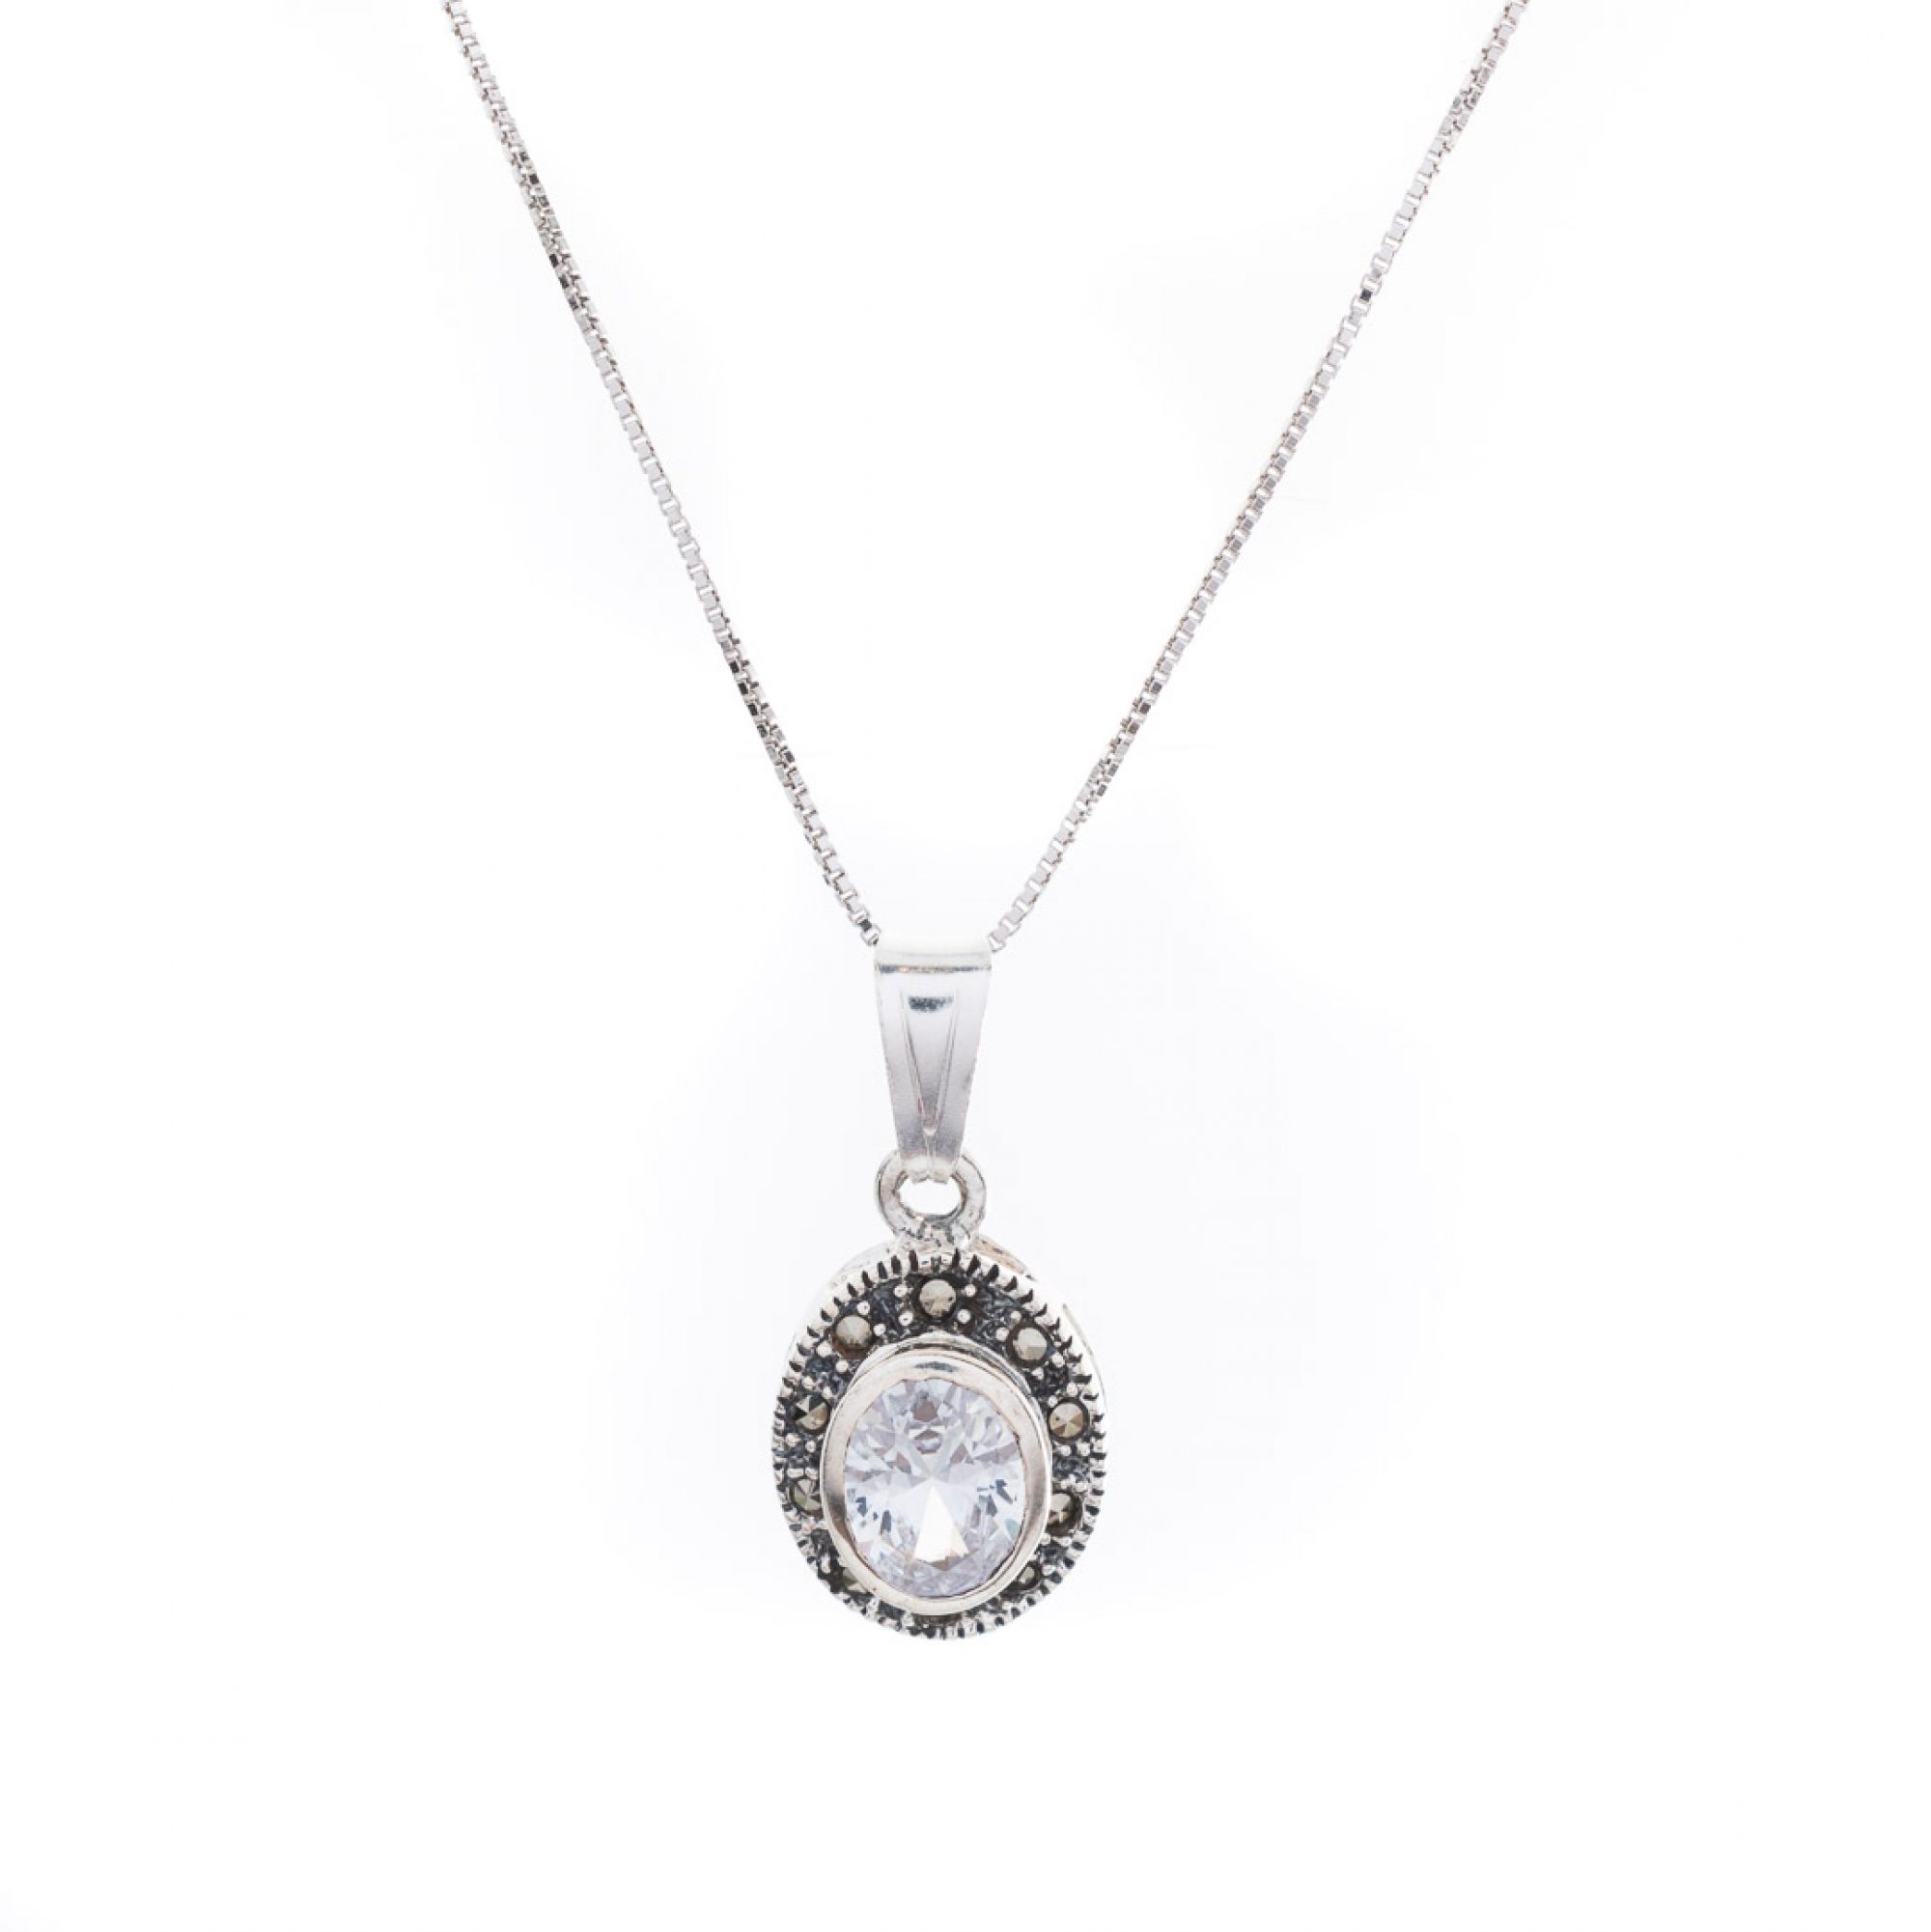 Necklace with marcasites and zircon stone